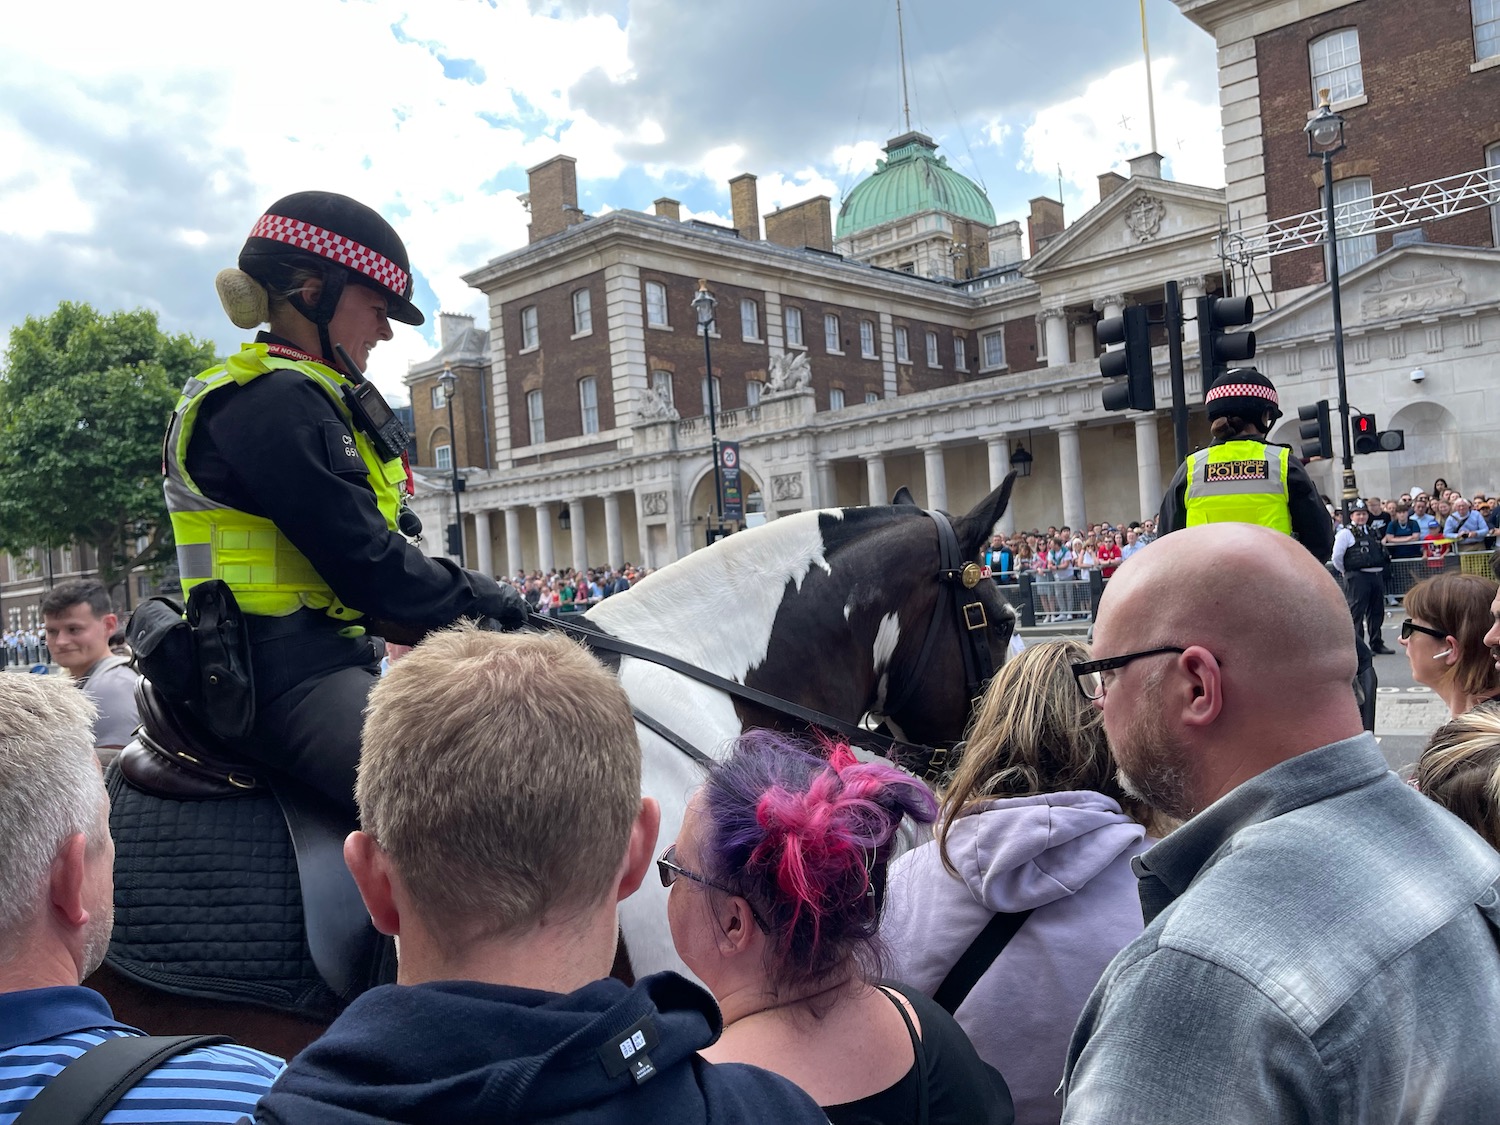 a police officer on a horse in front of a crowd